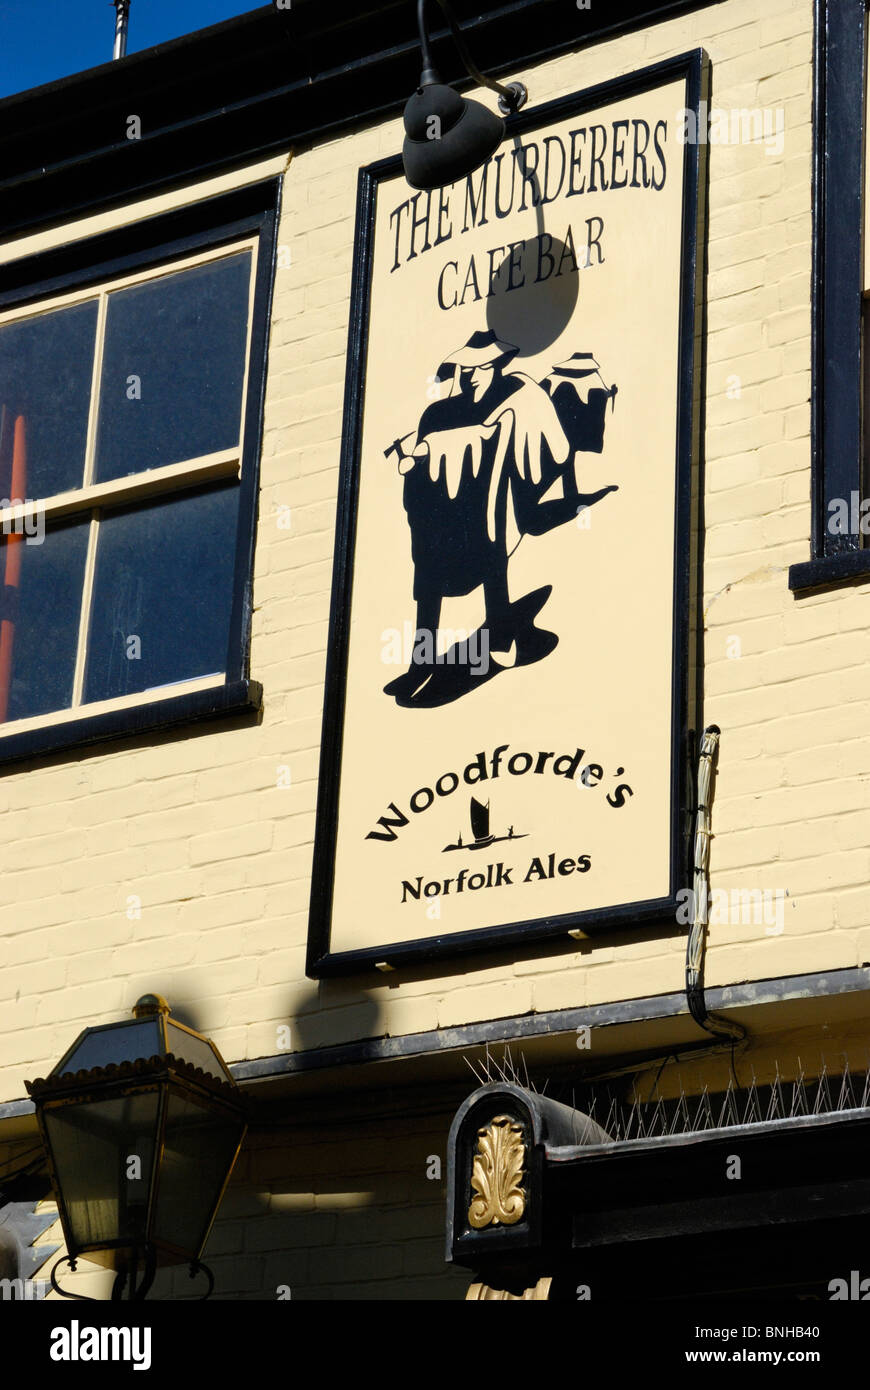 The Murderers cafe bar, Norwich, Norfolk, England Stock Photo